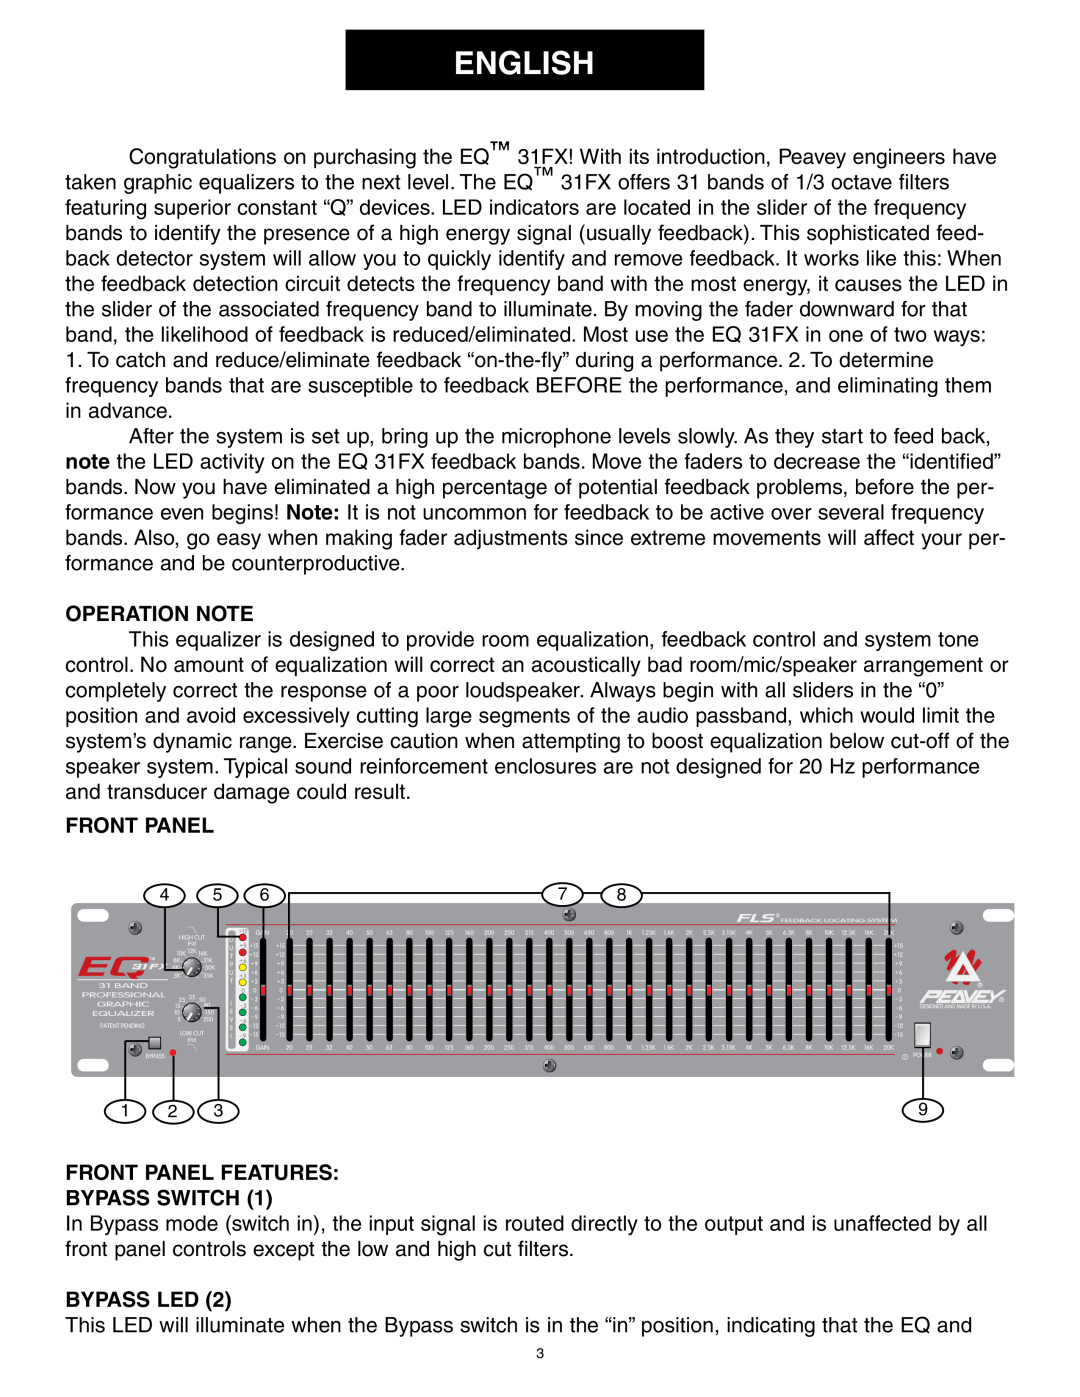 Peavey 31FX owner manual English, Operation Note, Front Panel Features Bypass Switch, Bypass Led 